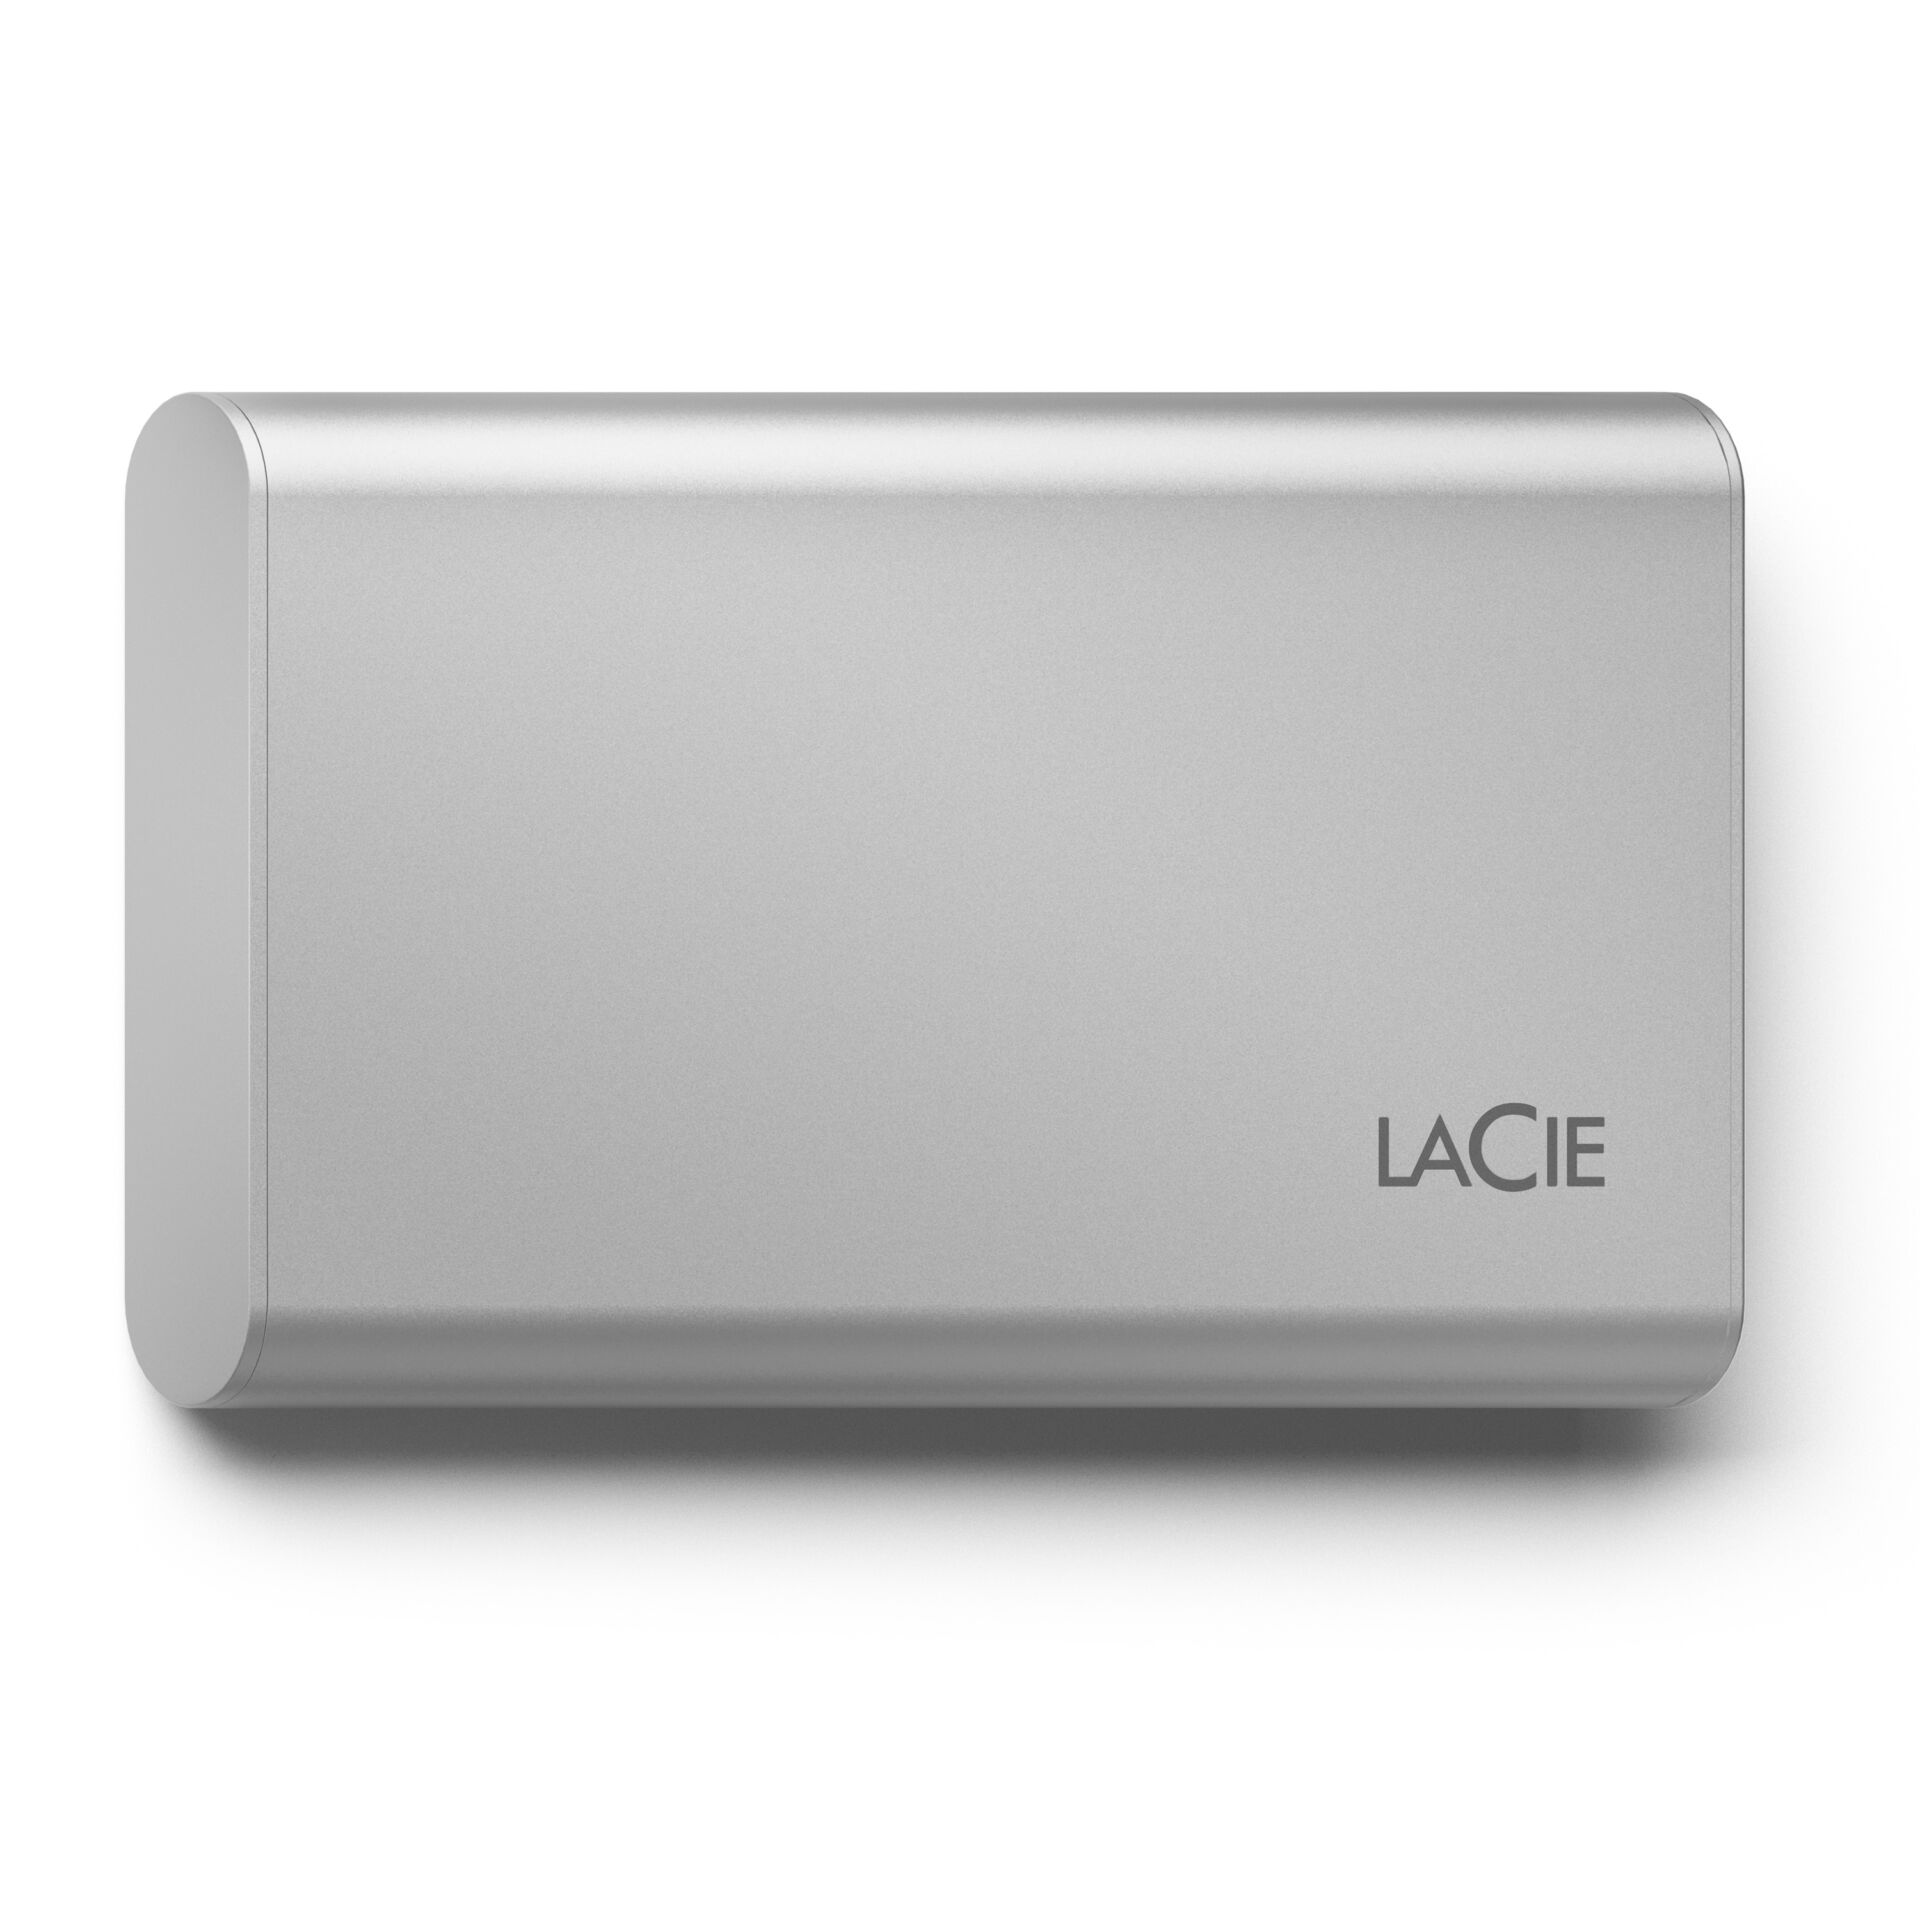 LaCie STKS500400 Externes Solid State Drive 500 GB Silber